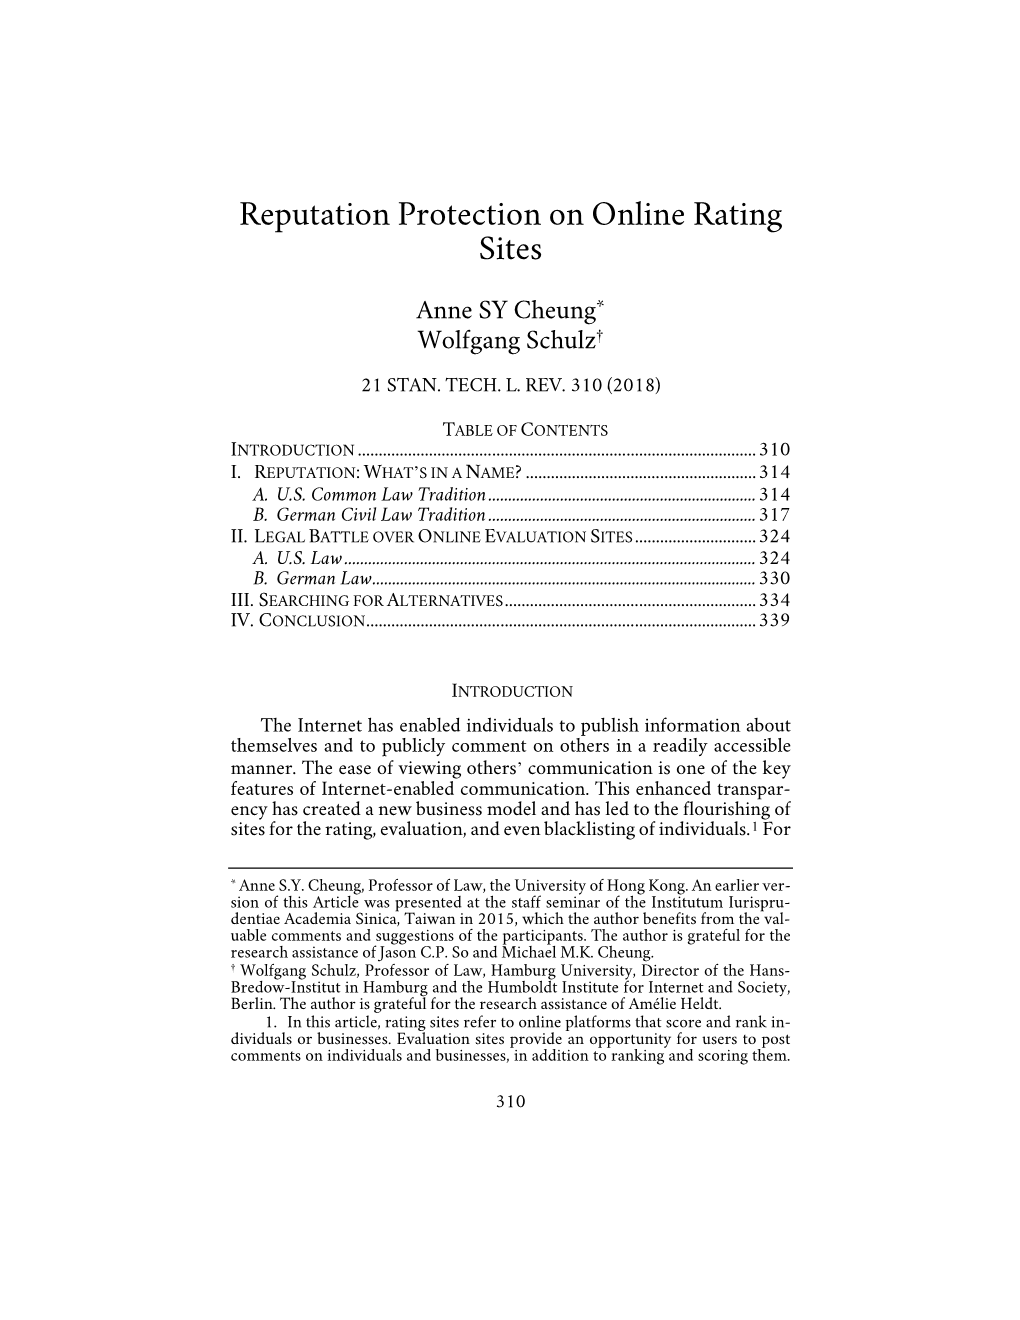 Reputation Protection on Online Rating Sites